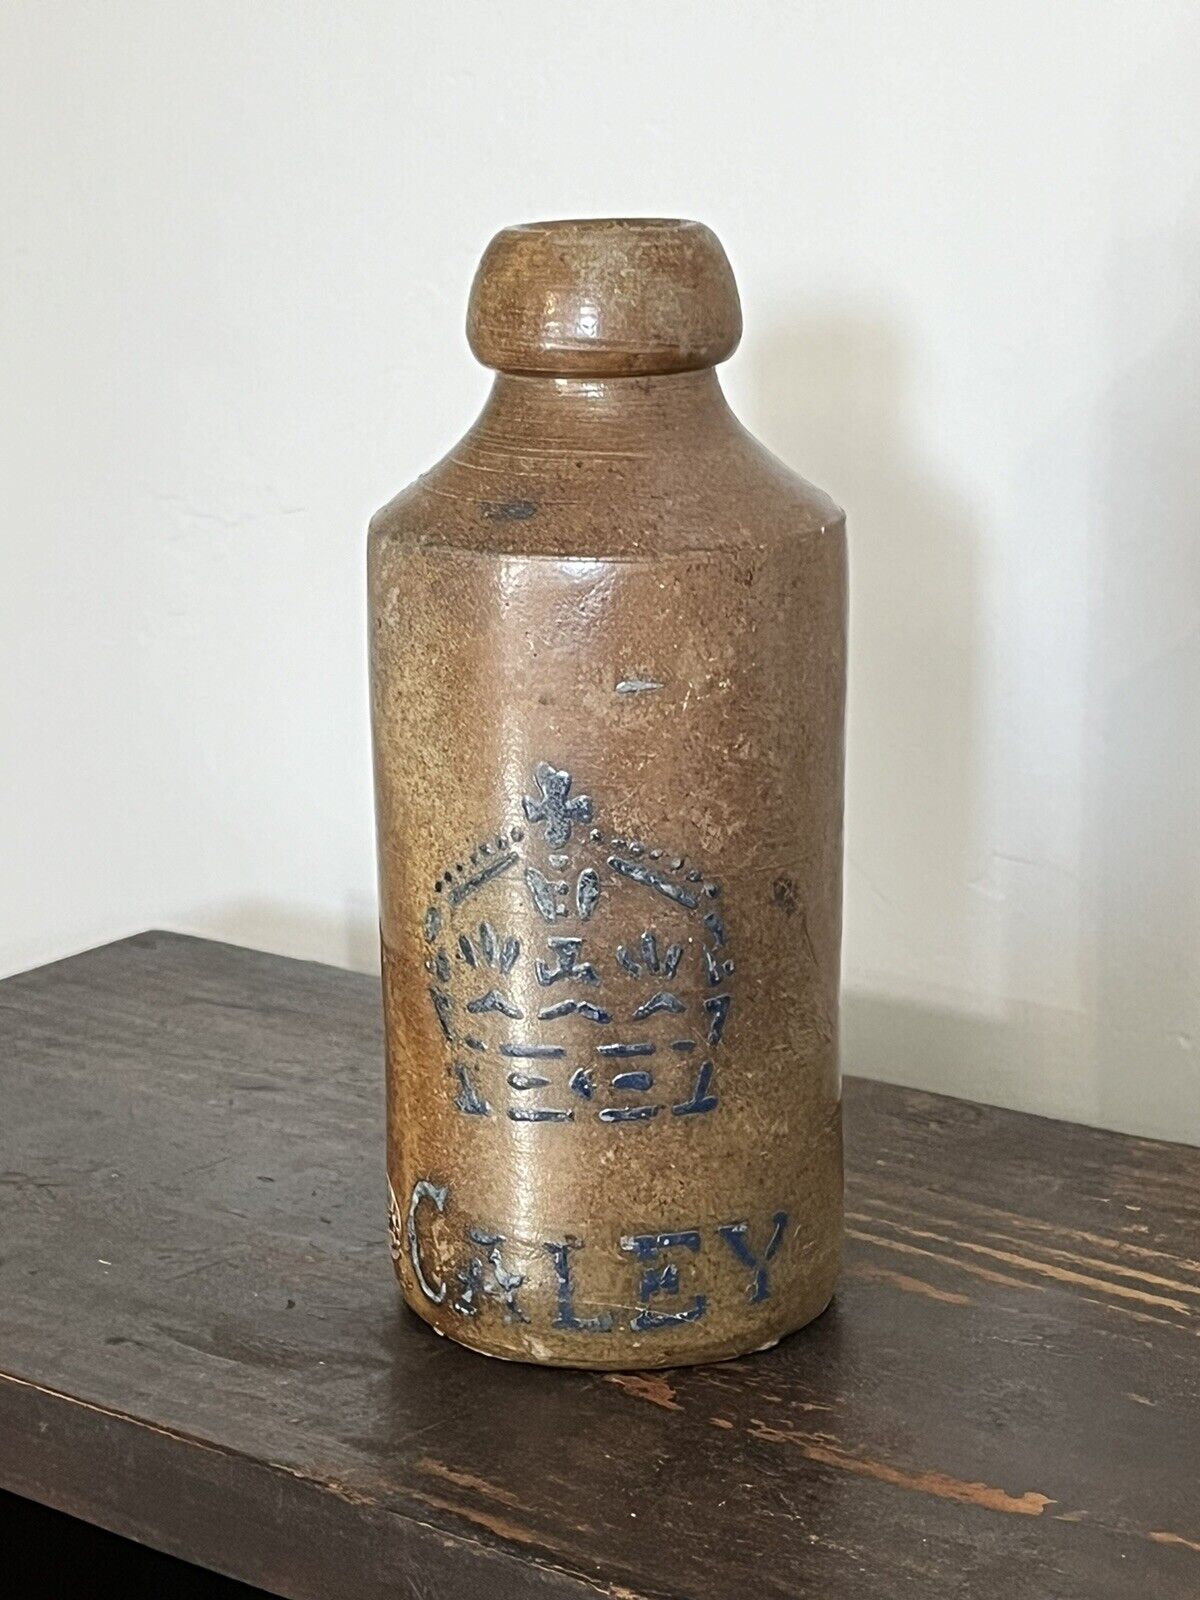 Antique Stoneware Caley Ginger Beer Bottle, 1800s, Stoneware by Bourne Denby